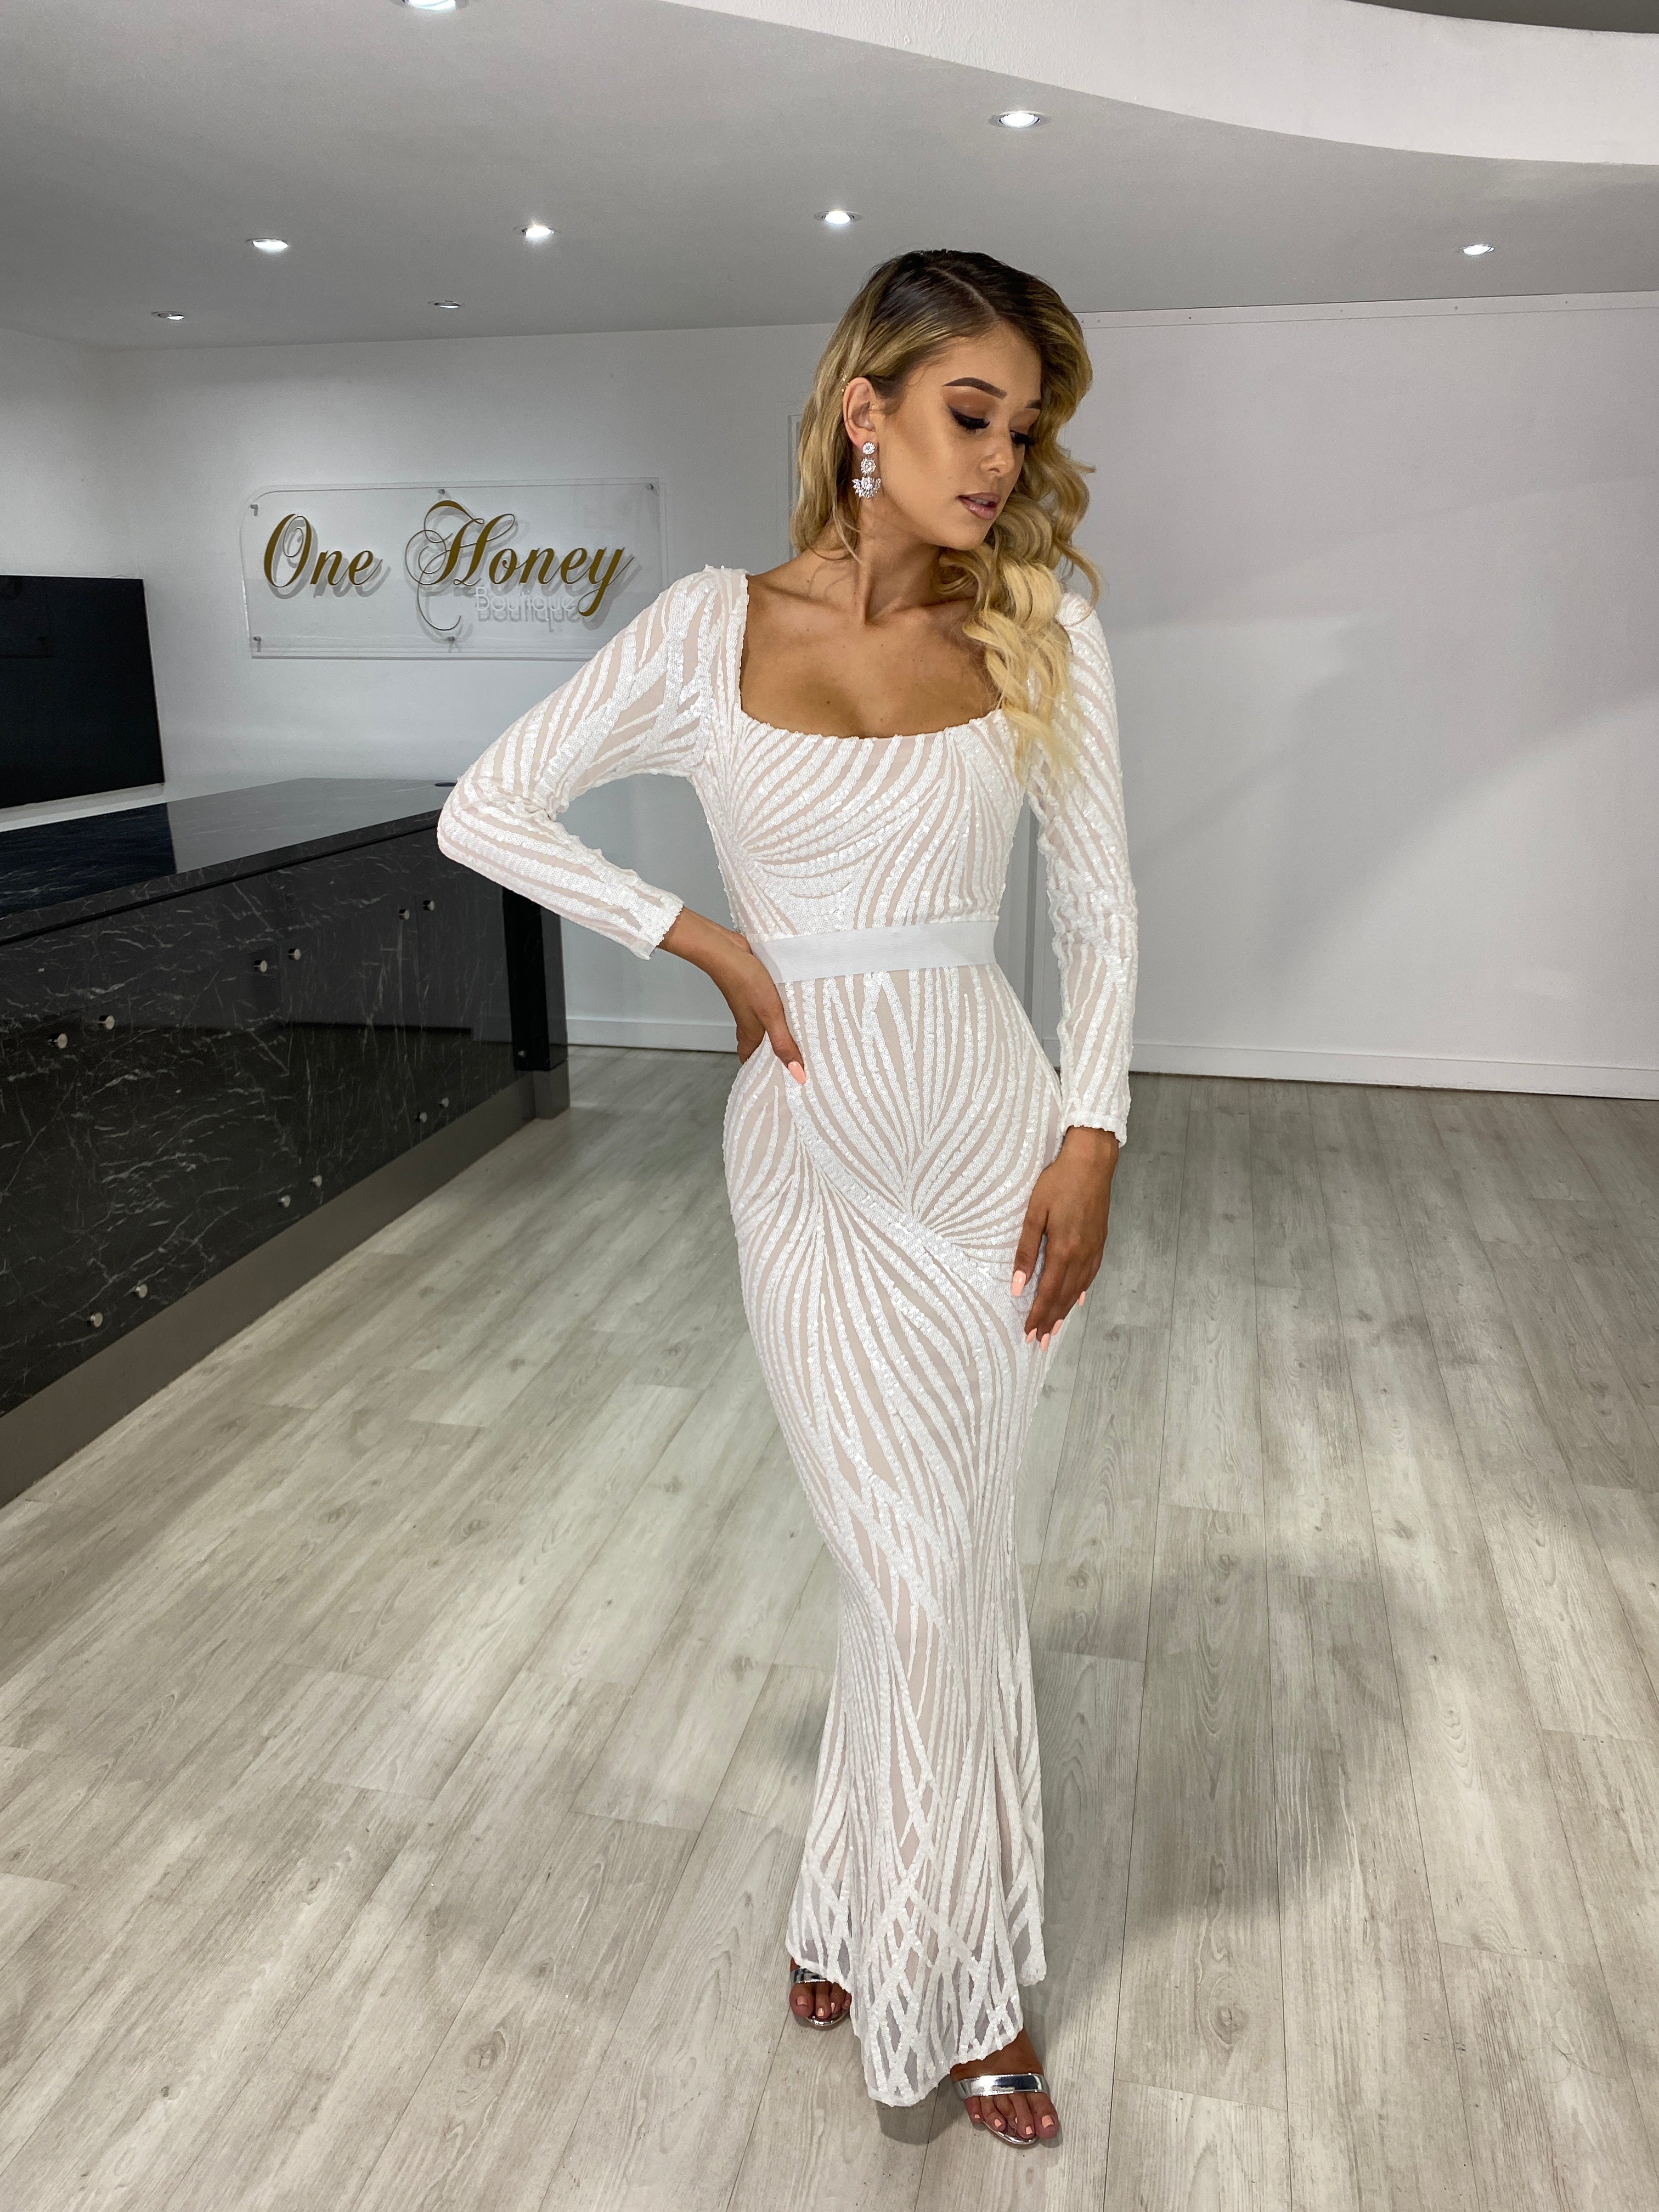 Honey Couture NADA White & Nude Long Sleeve Formal Dress